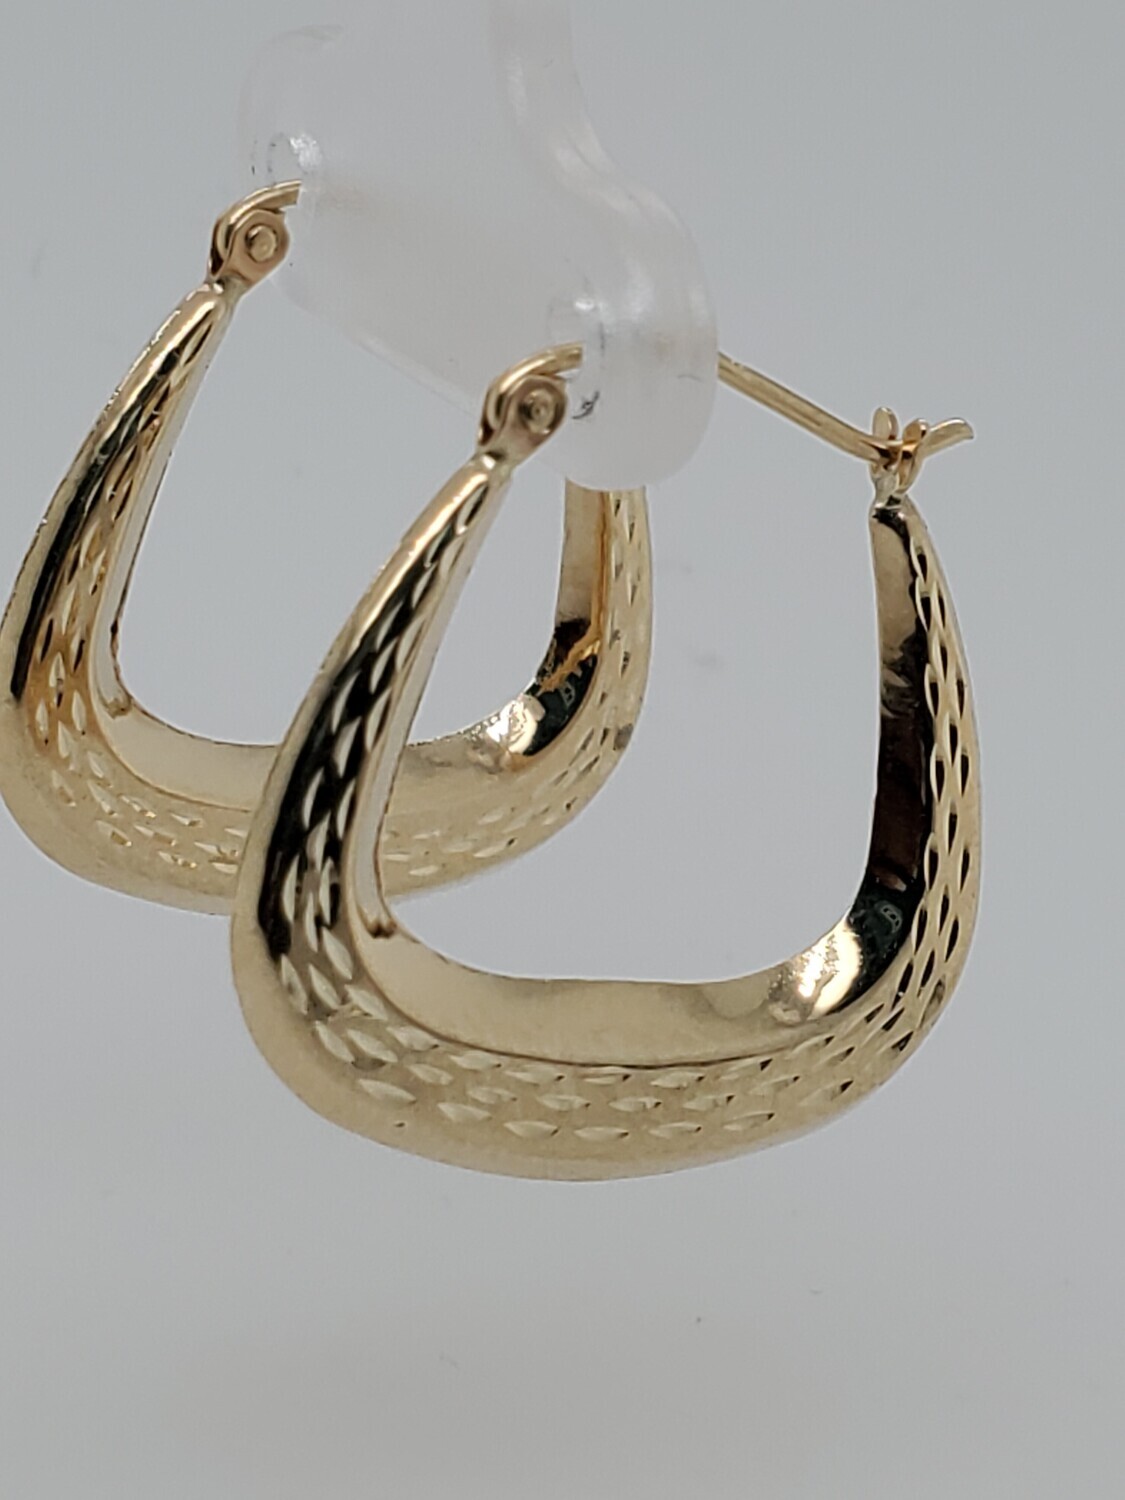 BRAND NEW!! 14KT SQUARE BOTTOM HOLLOW HOOP EARRINGS INVENTORY # I-18320 75TH AVE